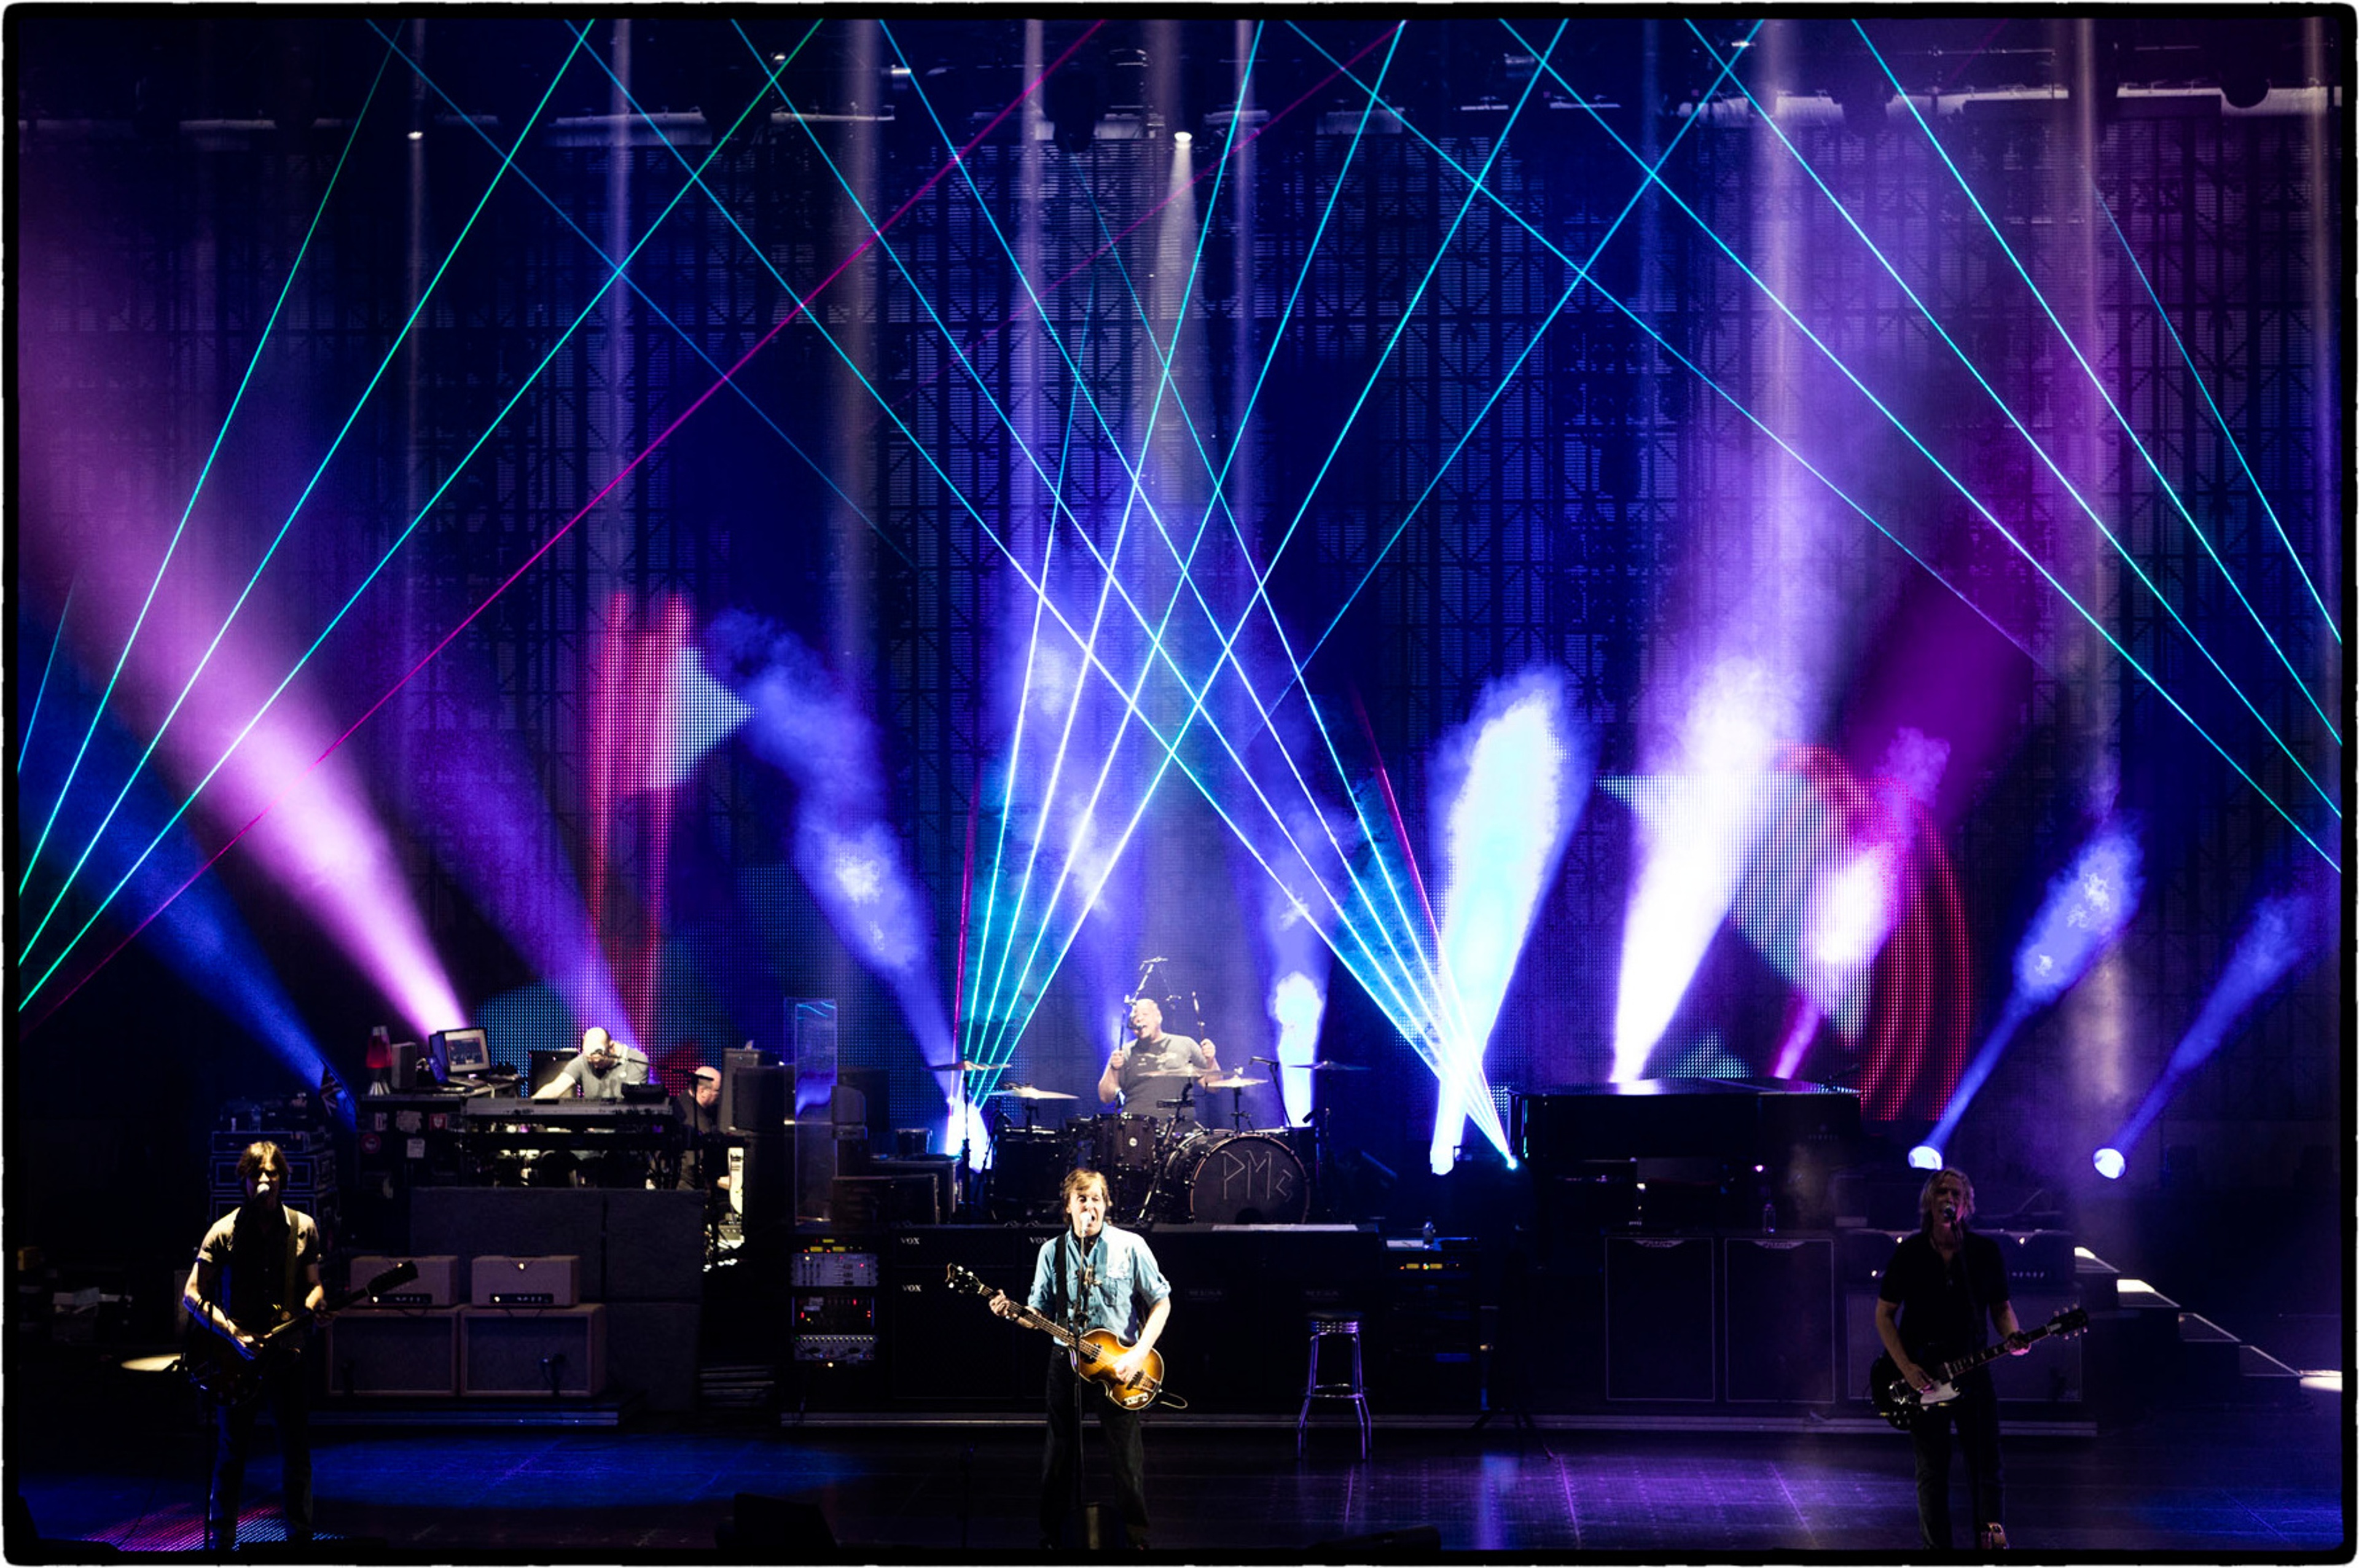 Rusty, Wix, Paul, Abe and Brian rehearsing on stage, Los Angeles, April 13th 2013